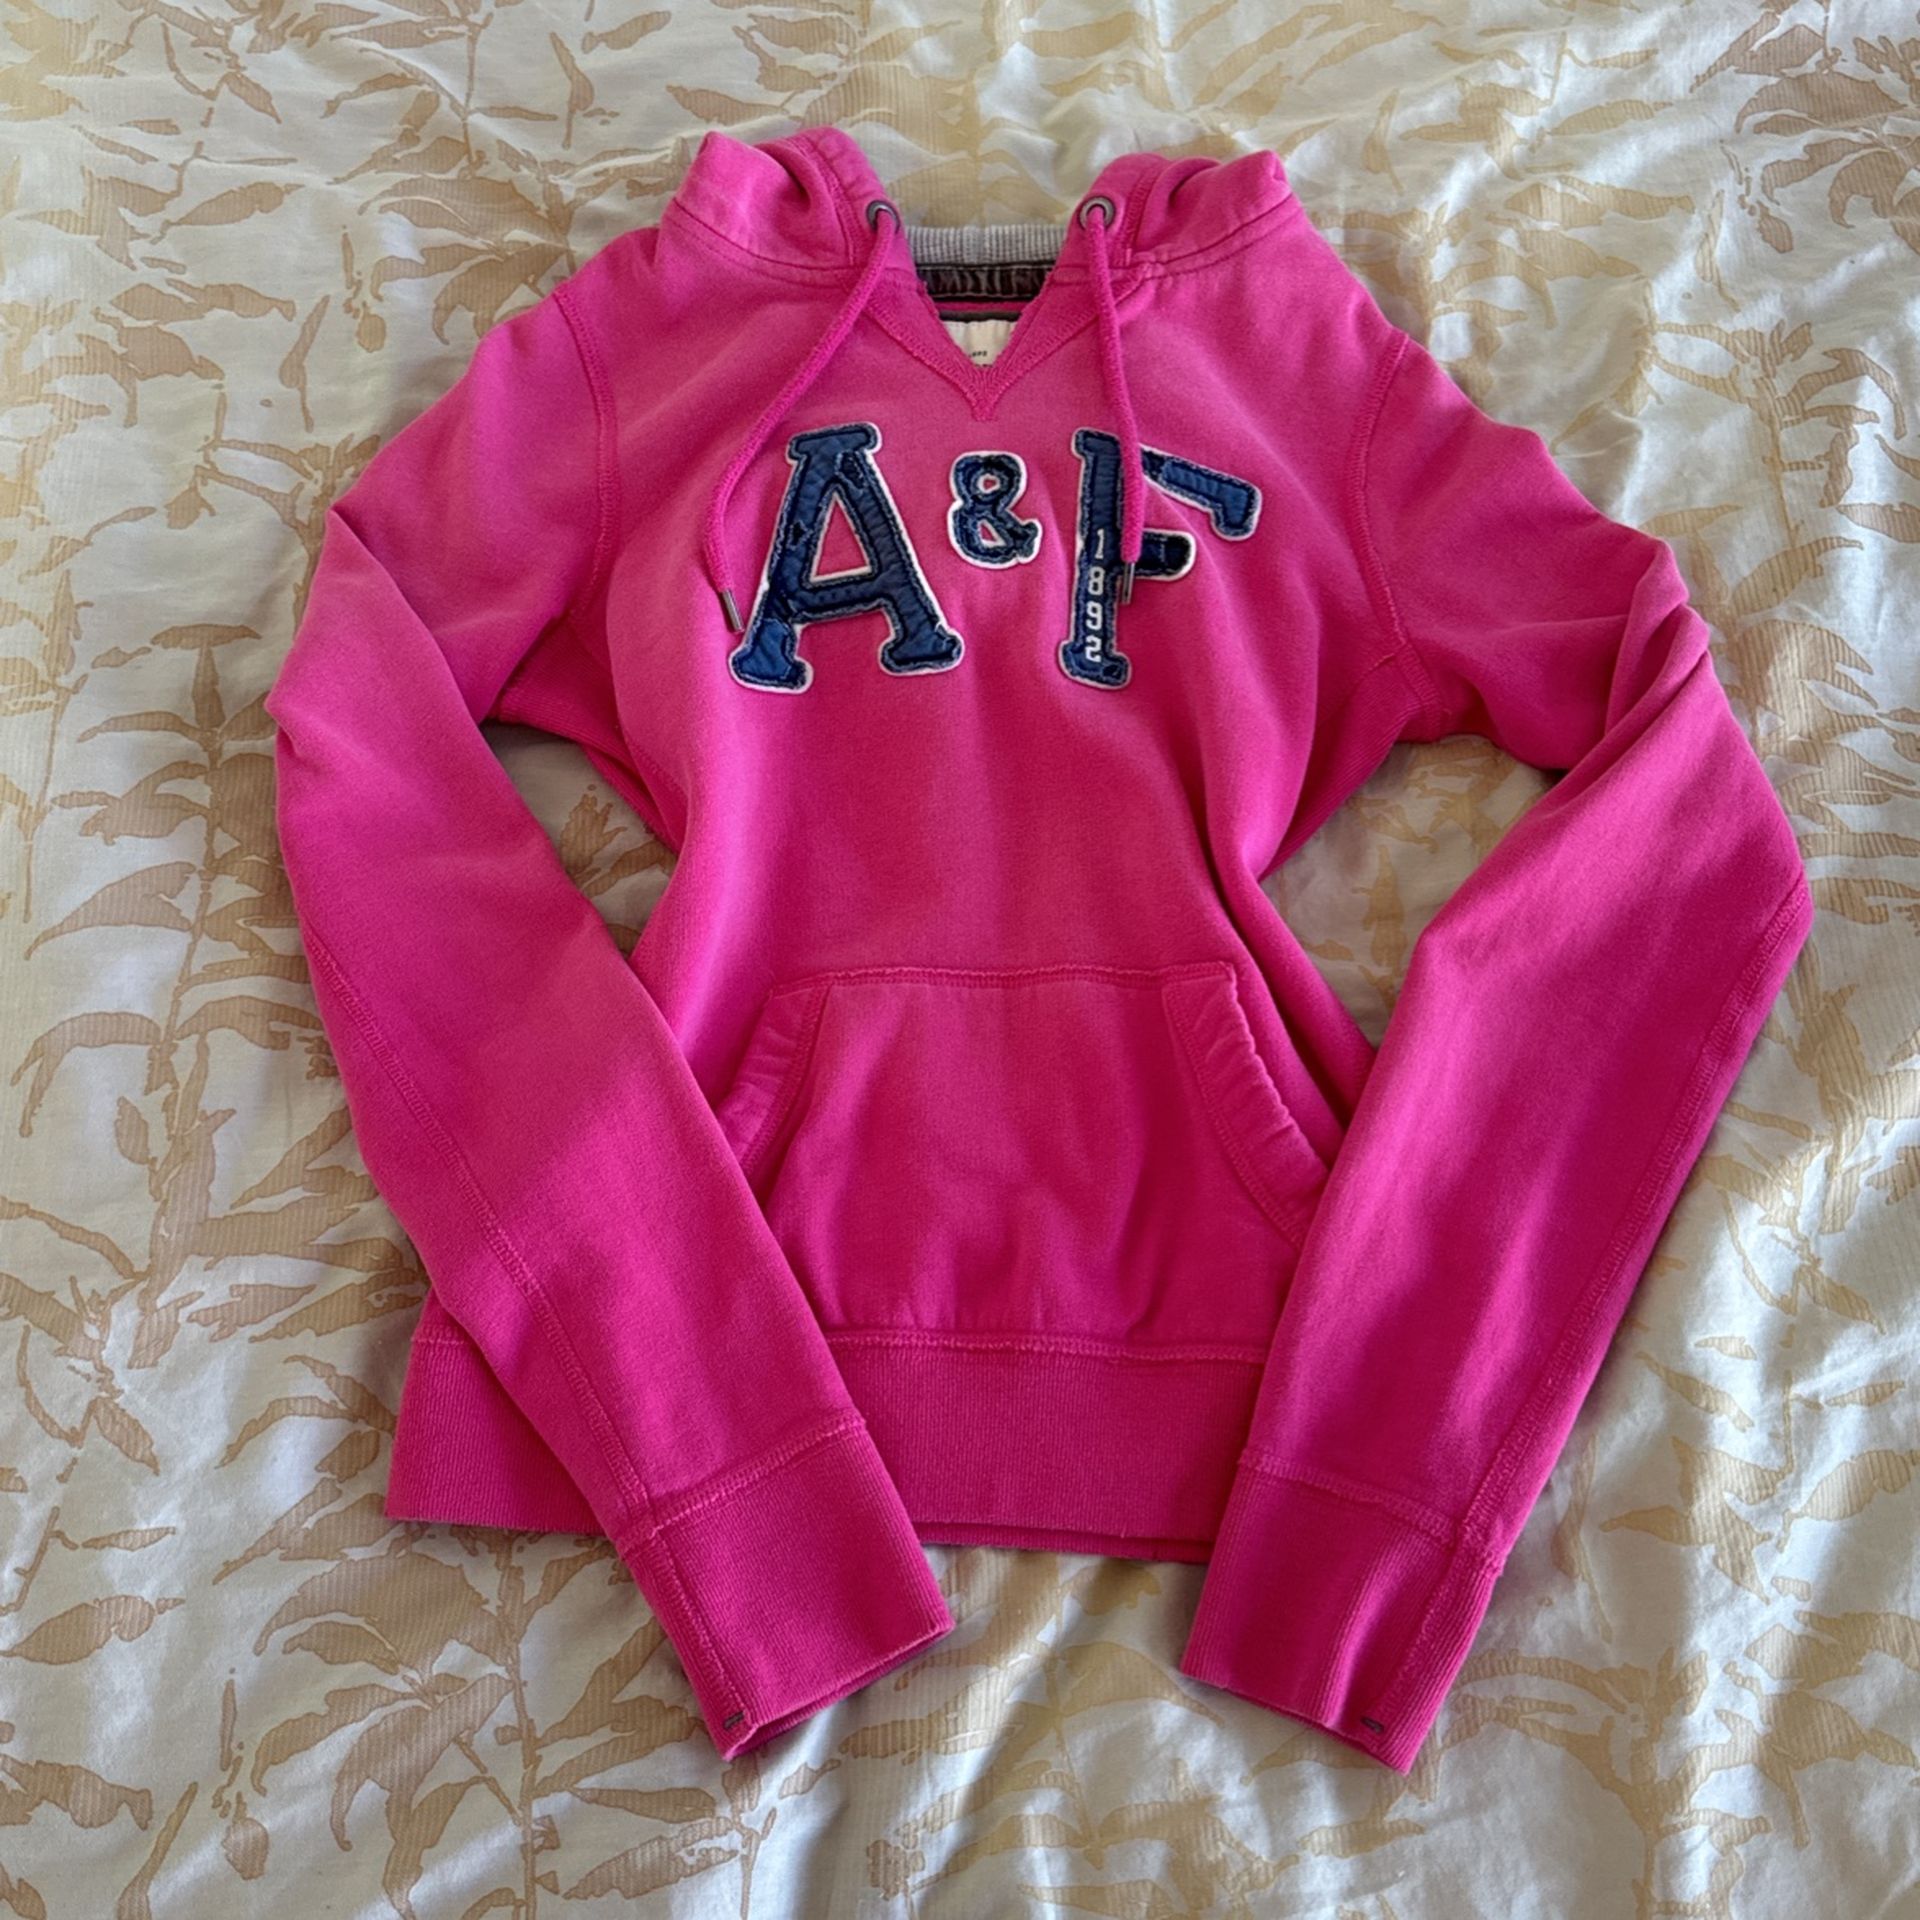 Abercrombie & Fitch Hot Pink Hoodie Size: Small